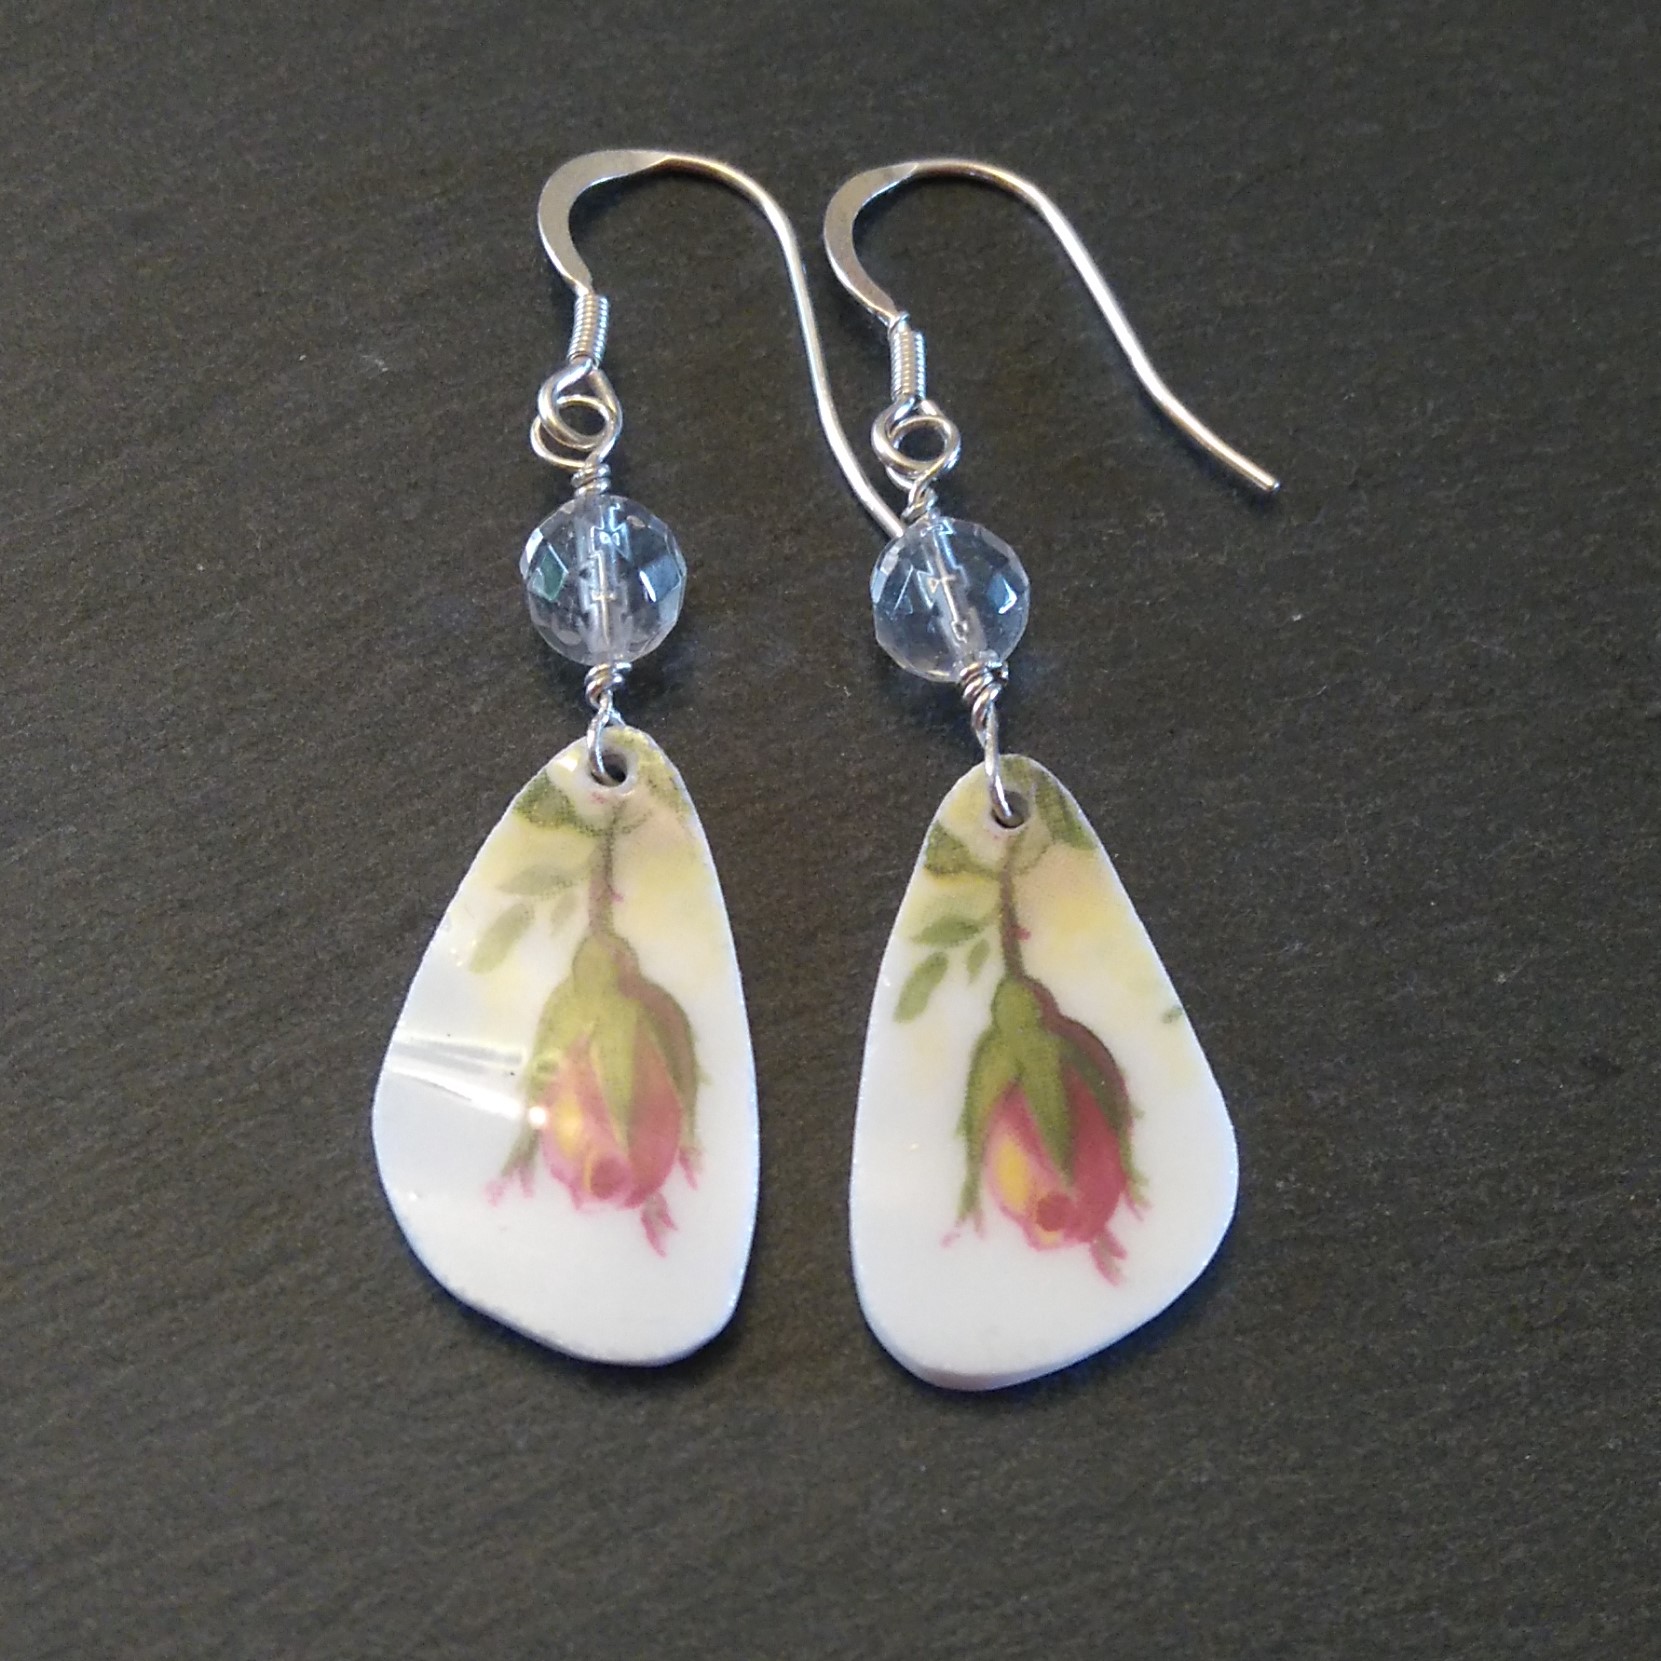 Old Country Roses - Rosebud Drop Earrings with Faceted Quartz